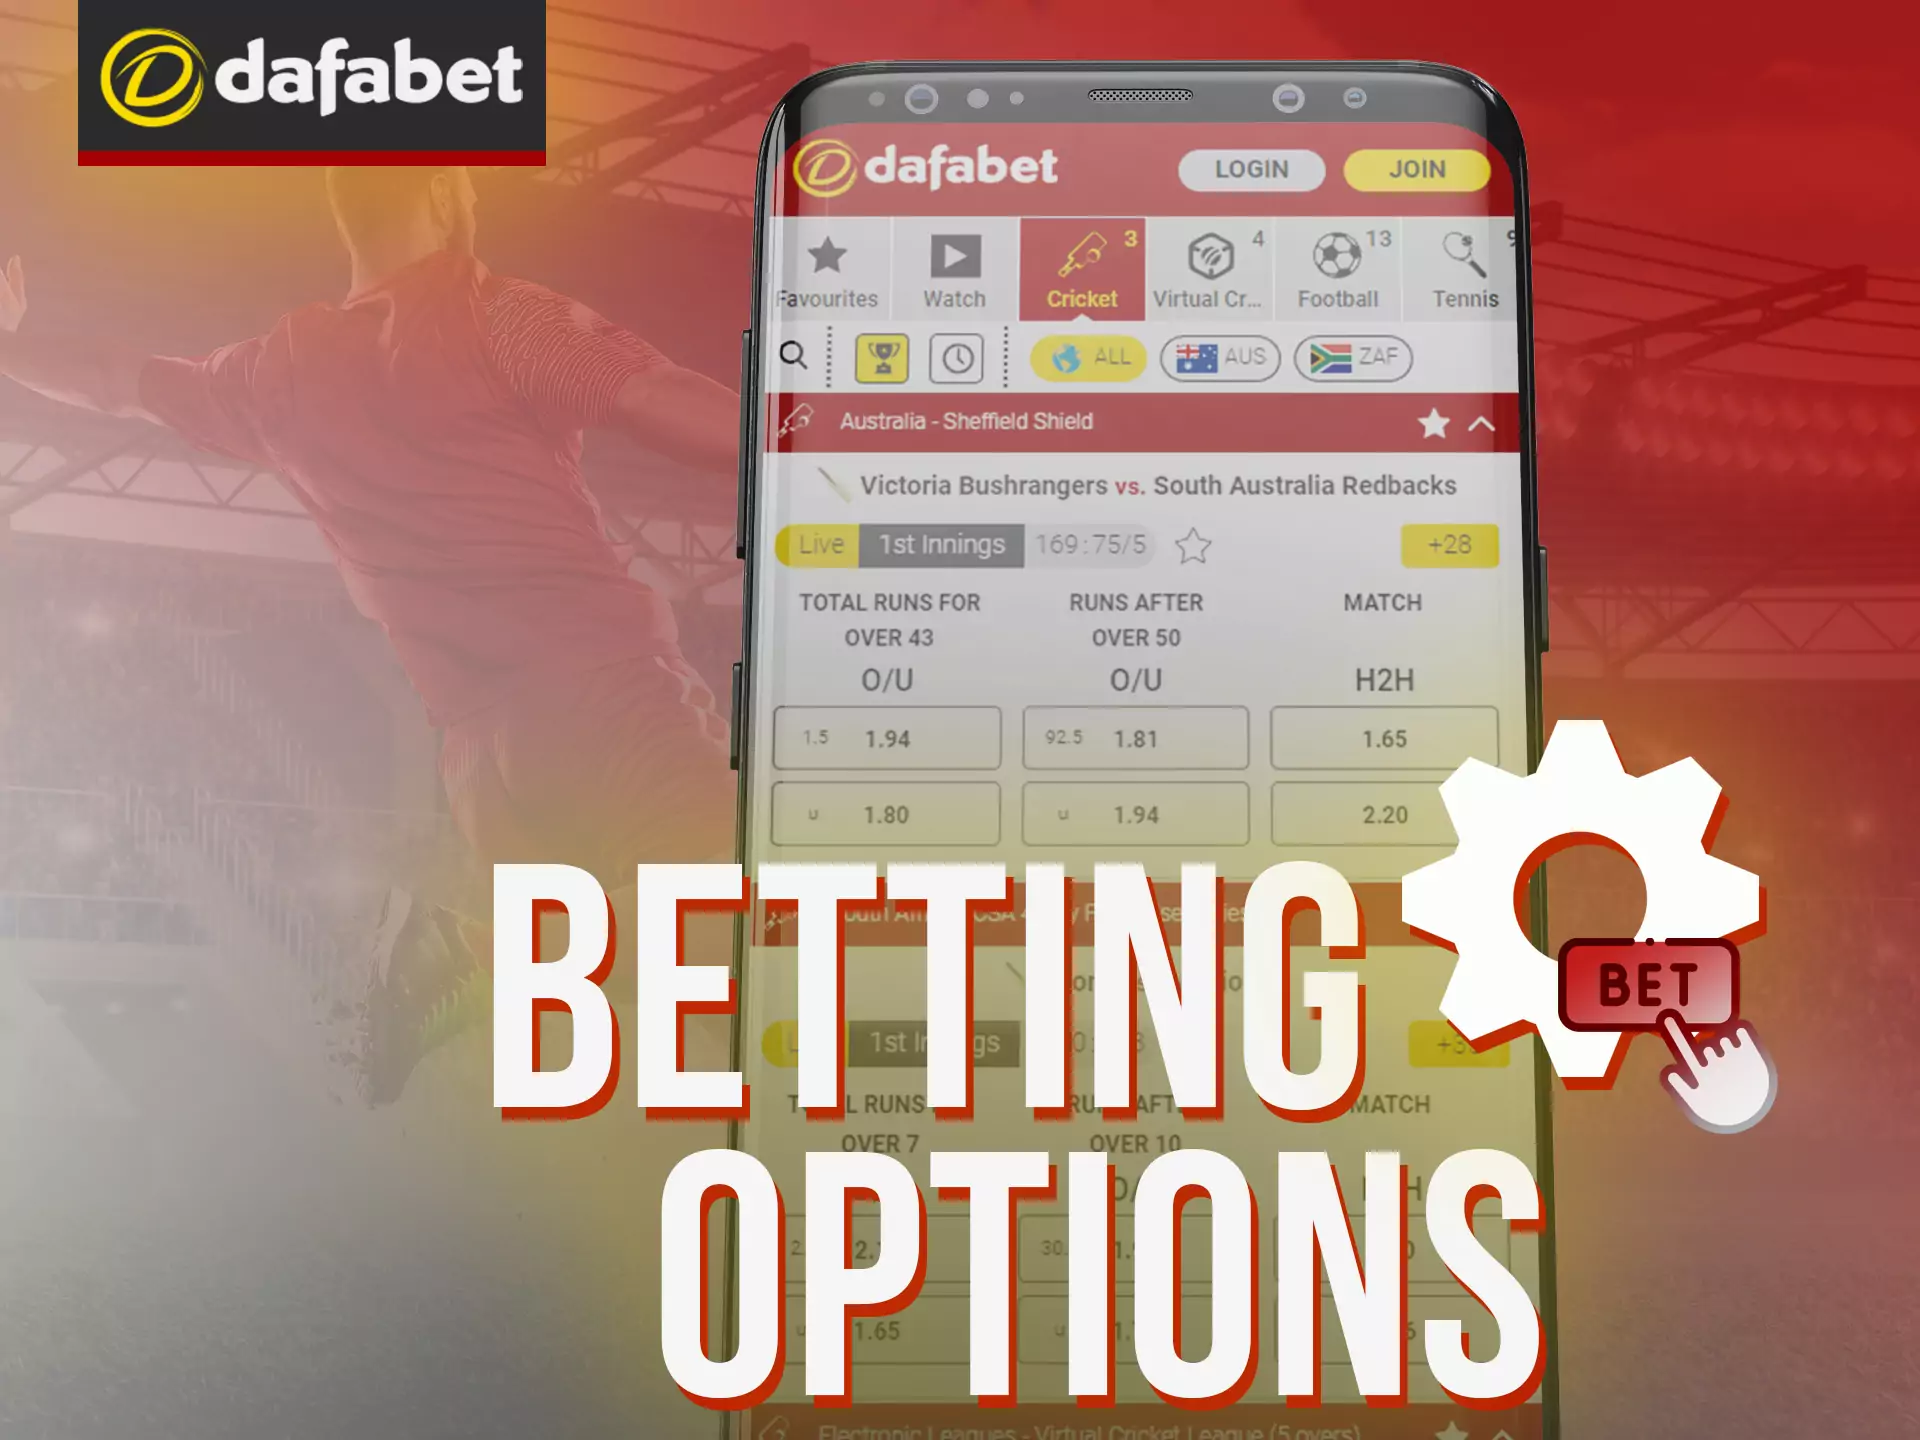 You can bet differently with Dafabet app.